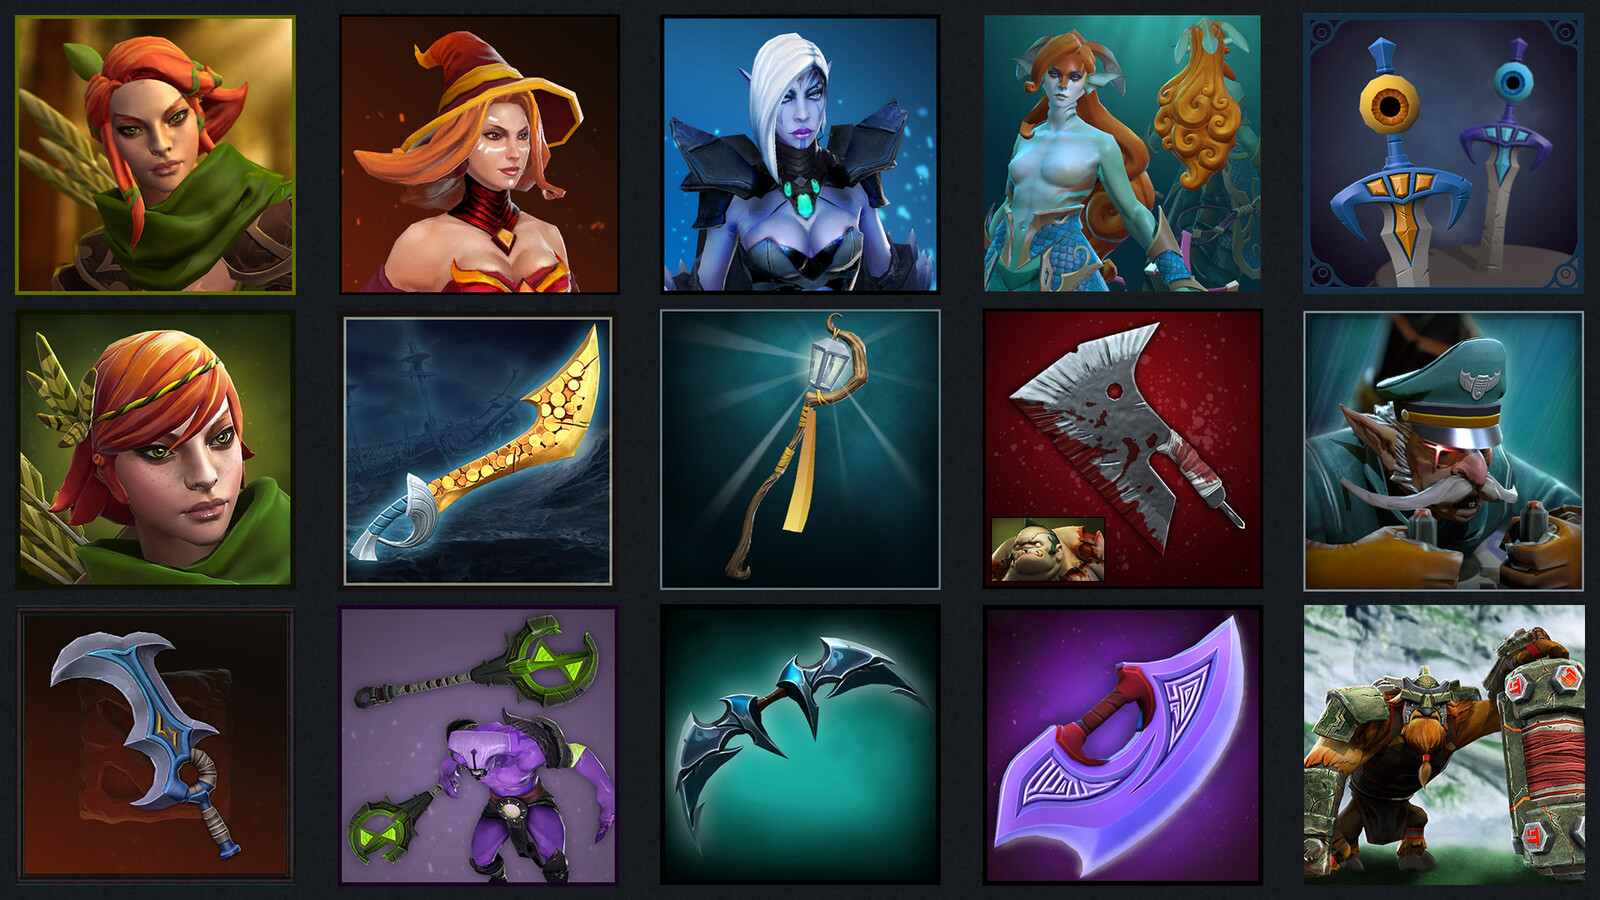 First two columns and top middle shipped in Dota 2